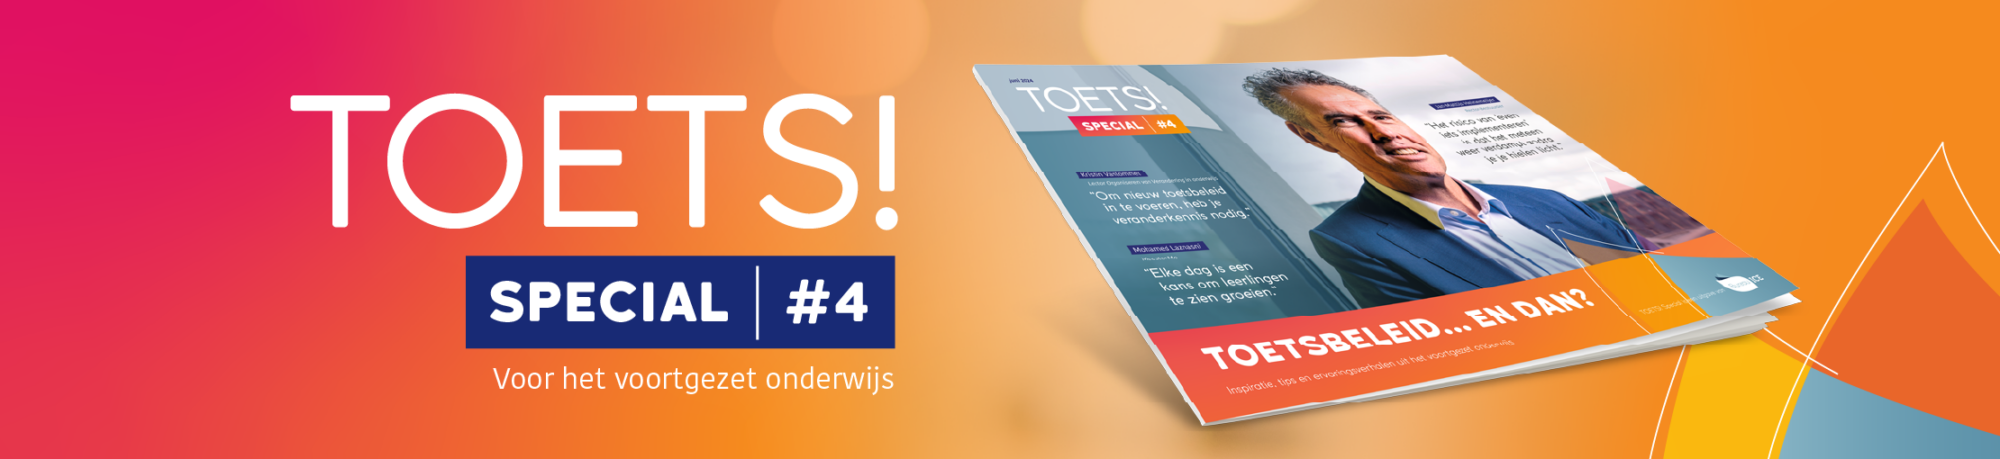 Toets! Special #4